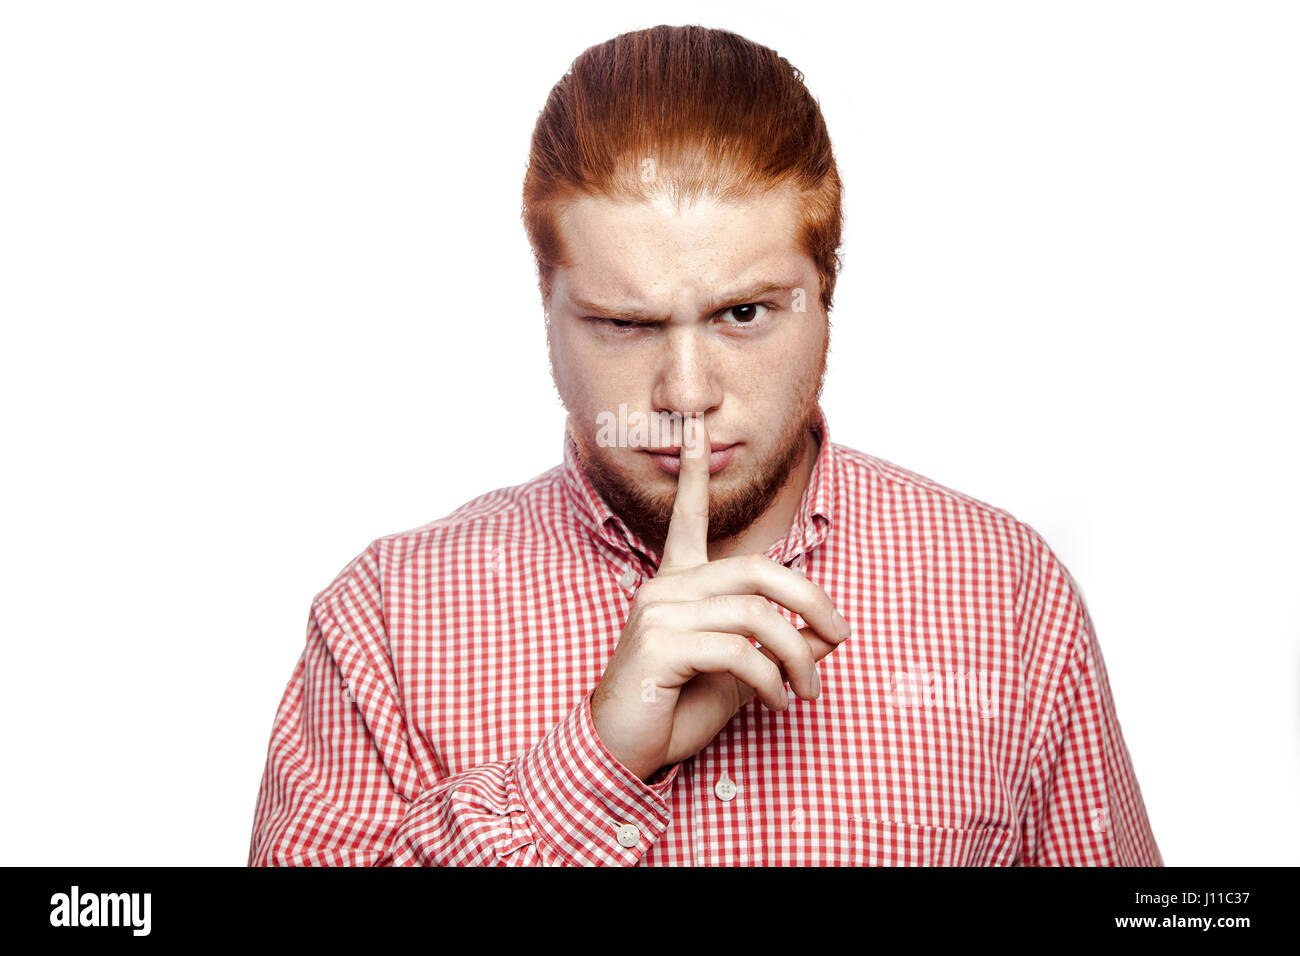 Serious businessman with finger on lips making silence gesture. shhh! bearded readhead businessman with red shirt and freckles looking at camera. stud Stock Photo